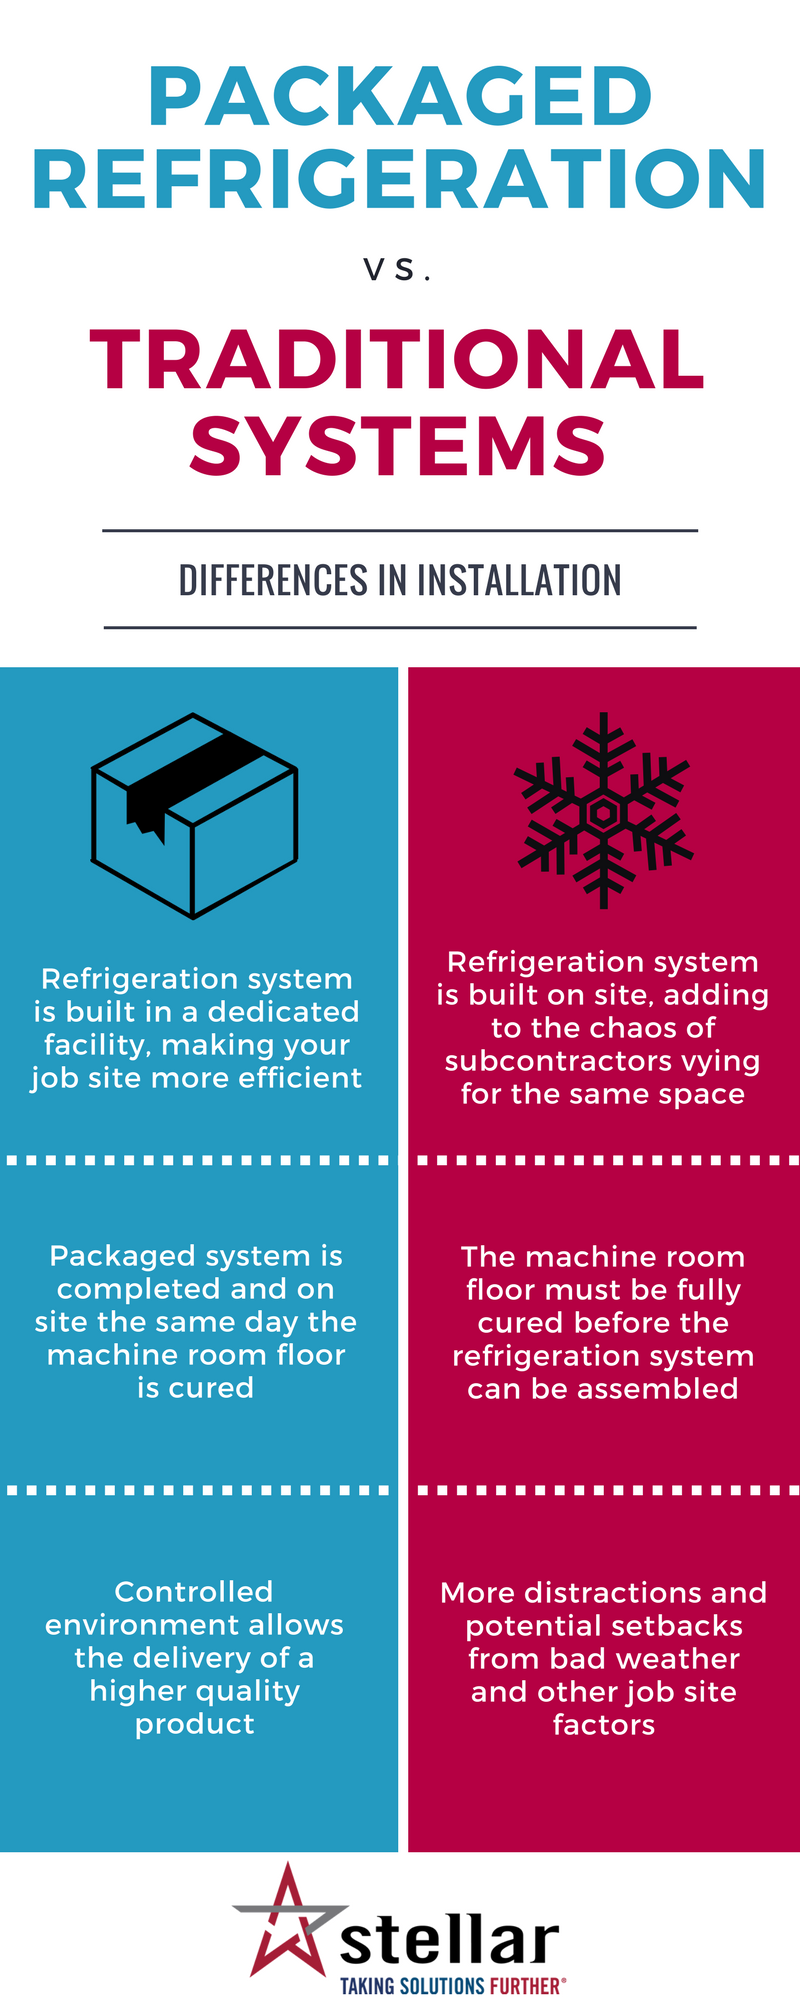 [Infographic] Installing Packaged Refrigeration vs. Traditional Systems